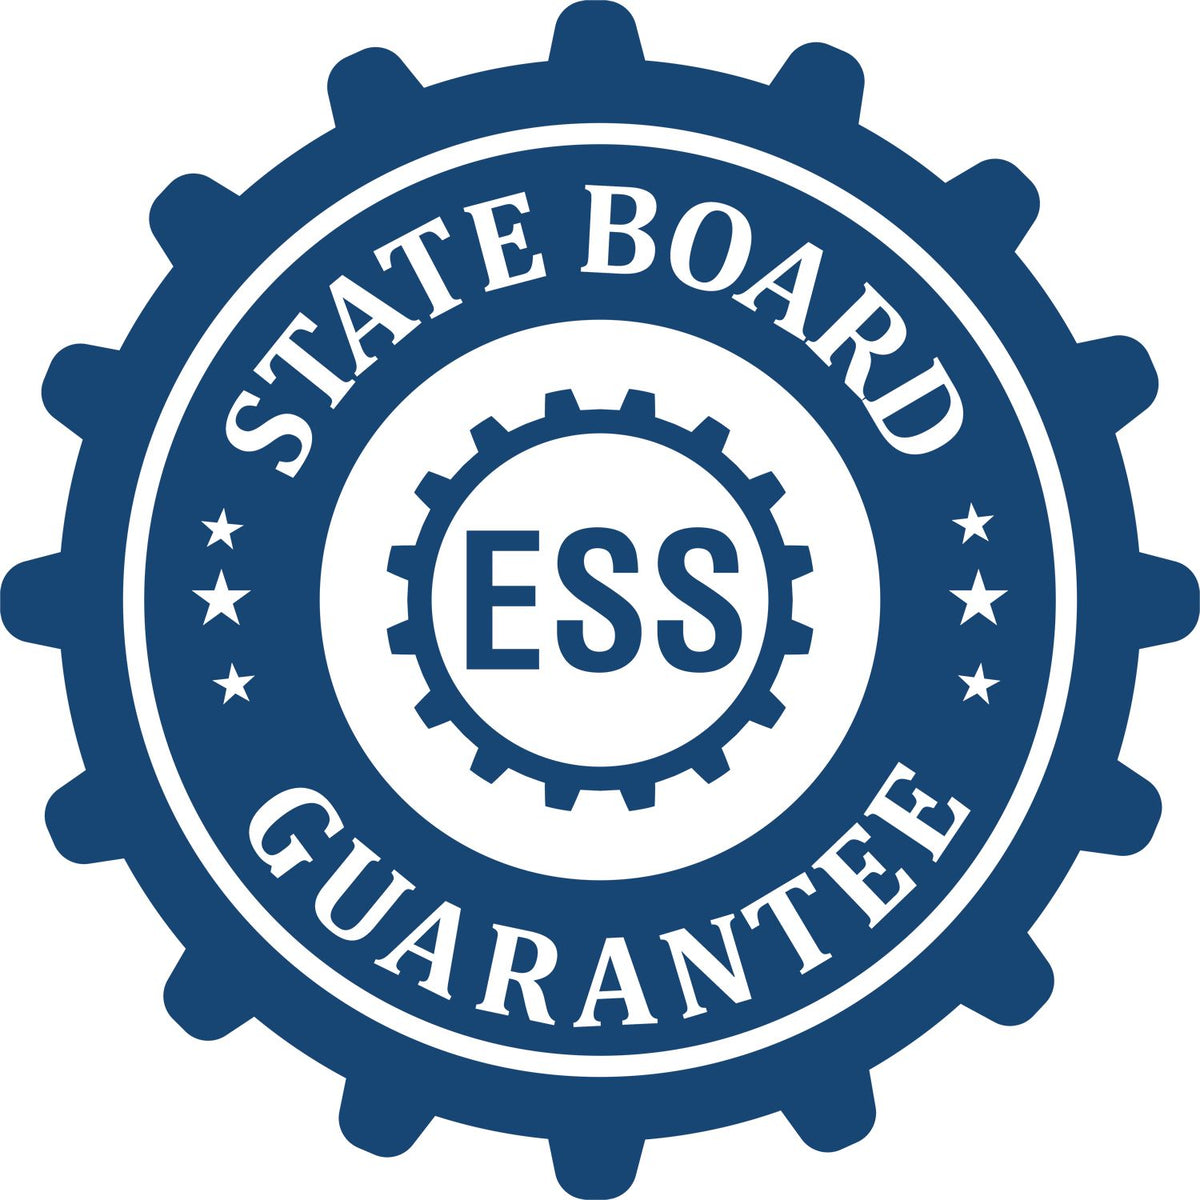 An emblem in a gear shape illustrating a state board guarantee for the Long Reach Alaska PE Seal product.